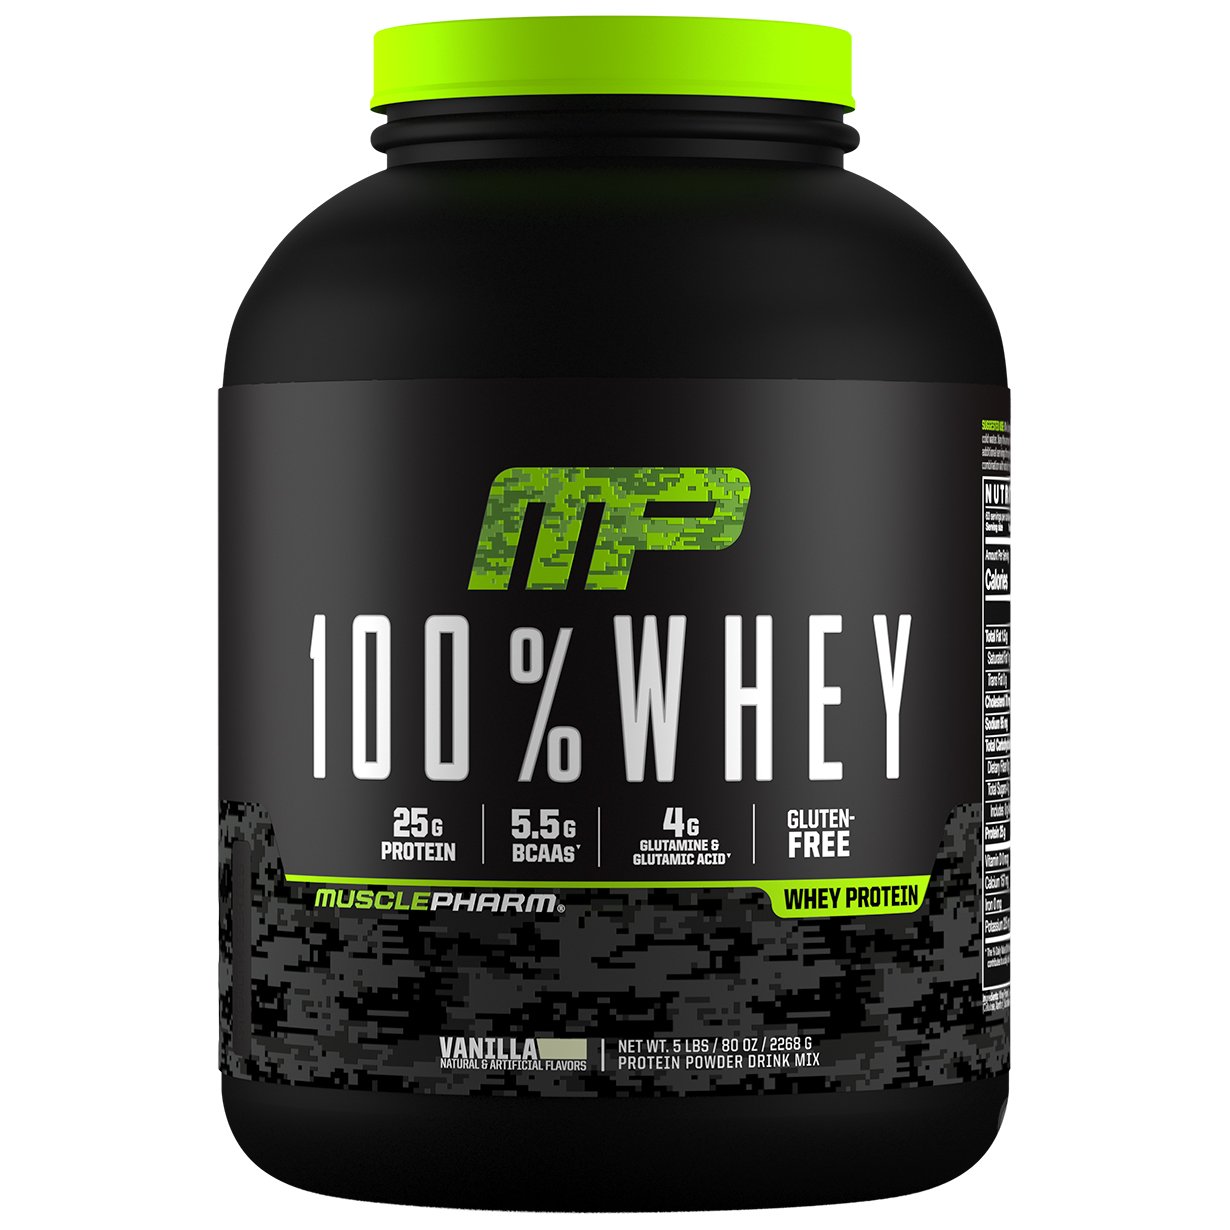 STEALTH SERIES 100% WHEY